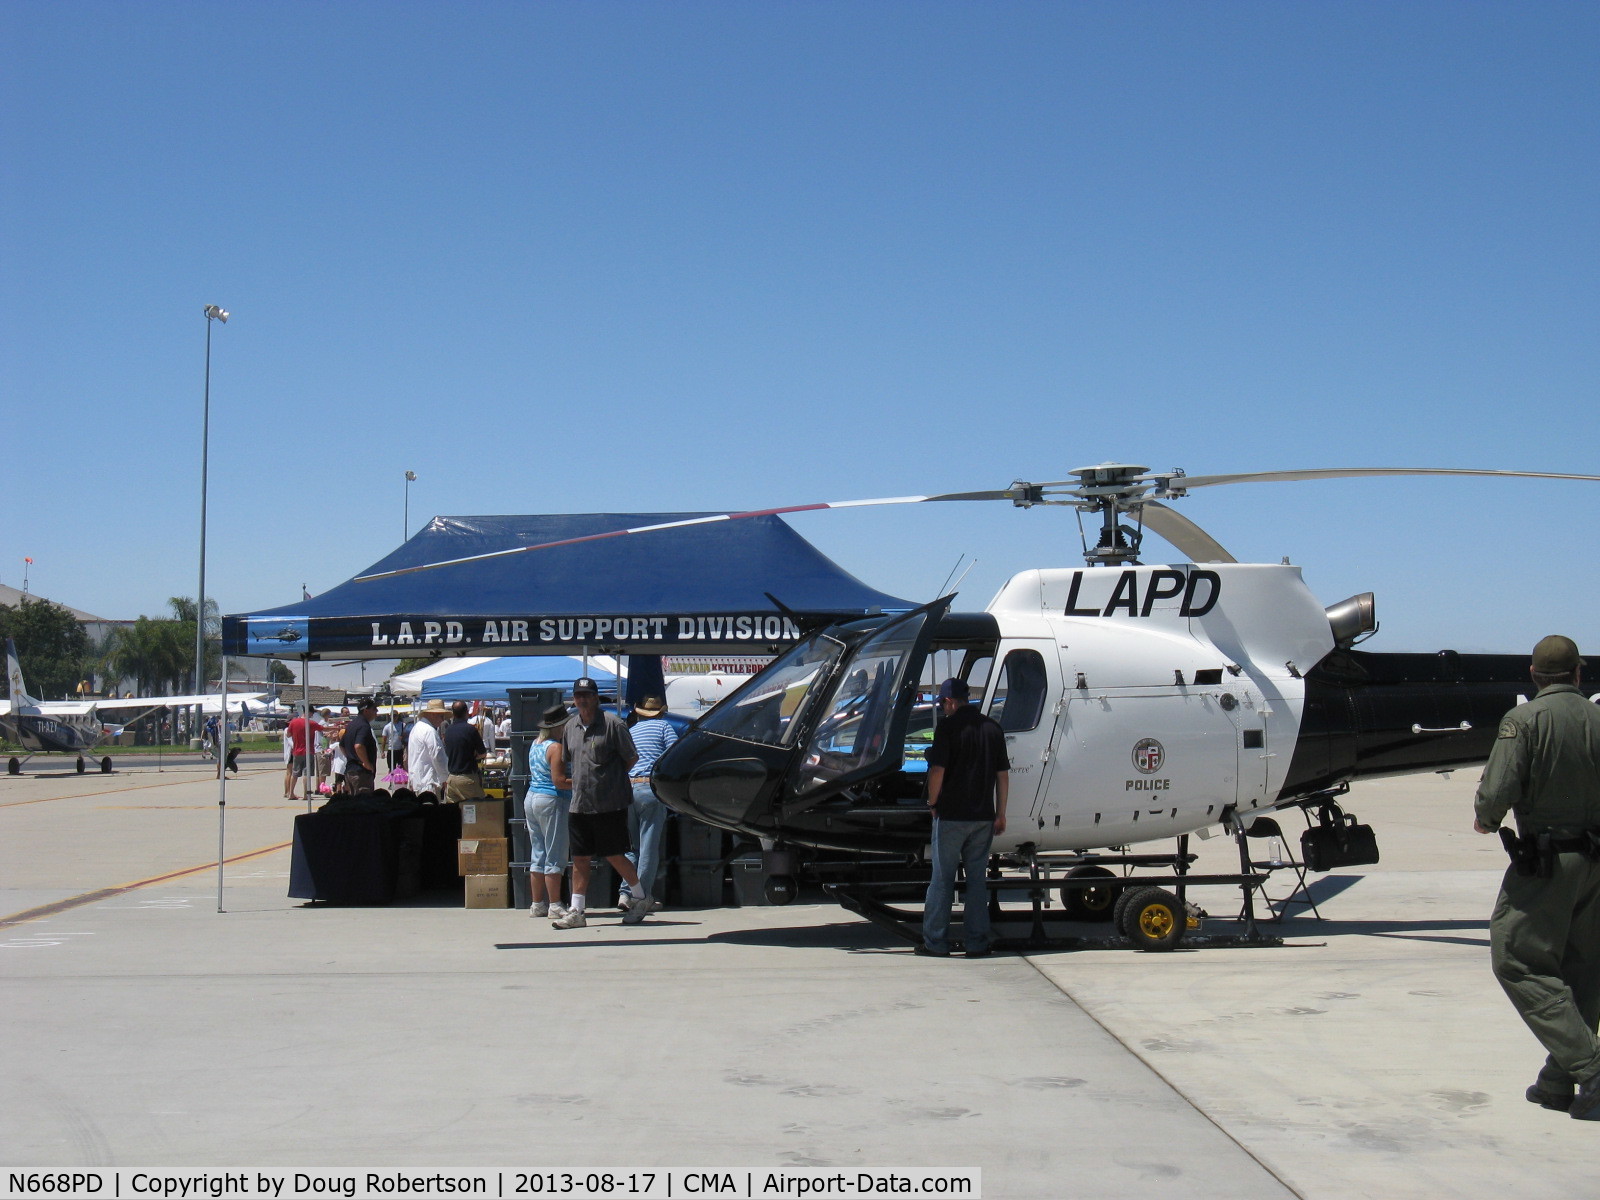 N668PD, 2009 Aerospatiale AS-350B-2 Ecureuil C/N 4654, American Eurocopter LLC AS350B2 SuperStar of Los Angeles PD, one Turbomeca Arriel 1D1 Turboshaft of 590 shp for takeoff, with exhibit booth always a crowd attractor, especially in Ventura County